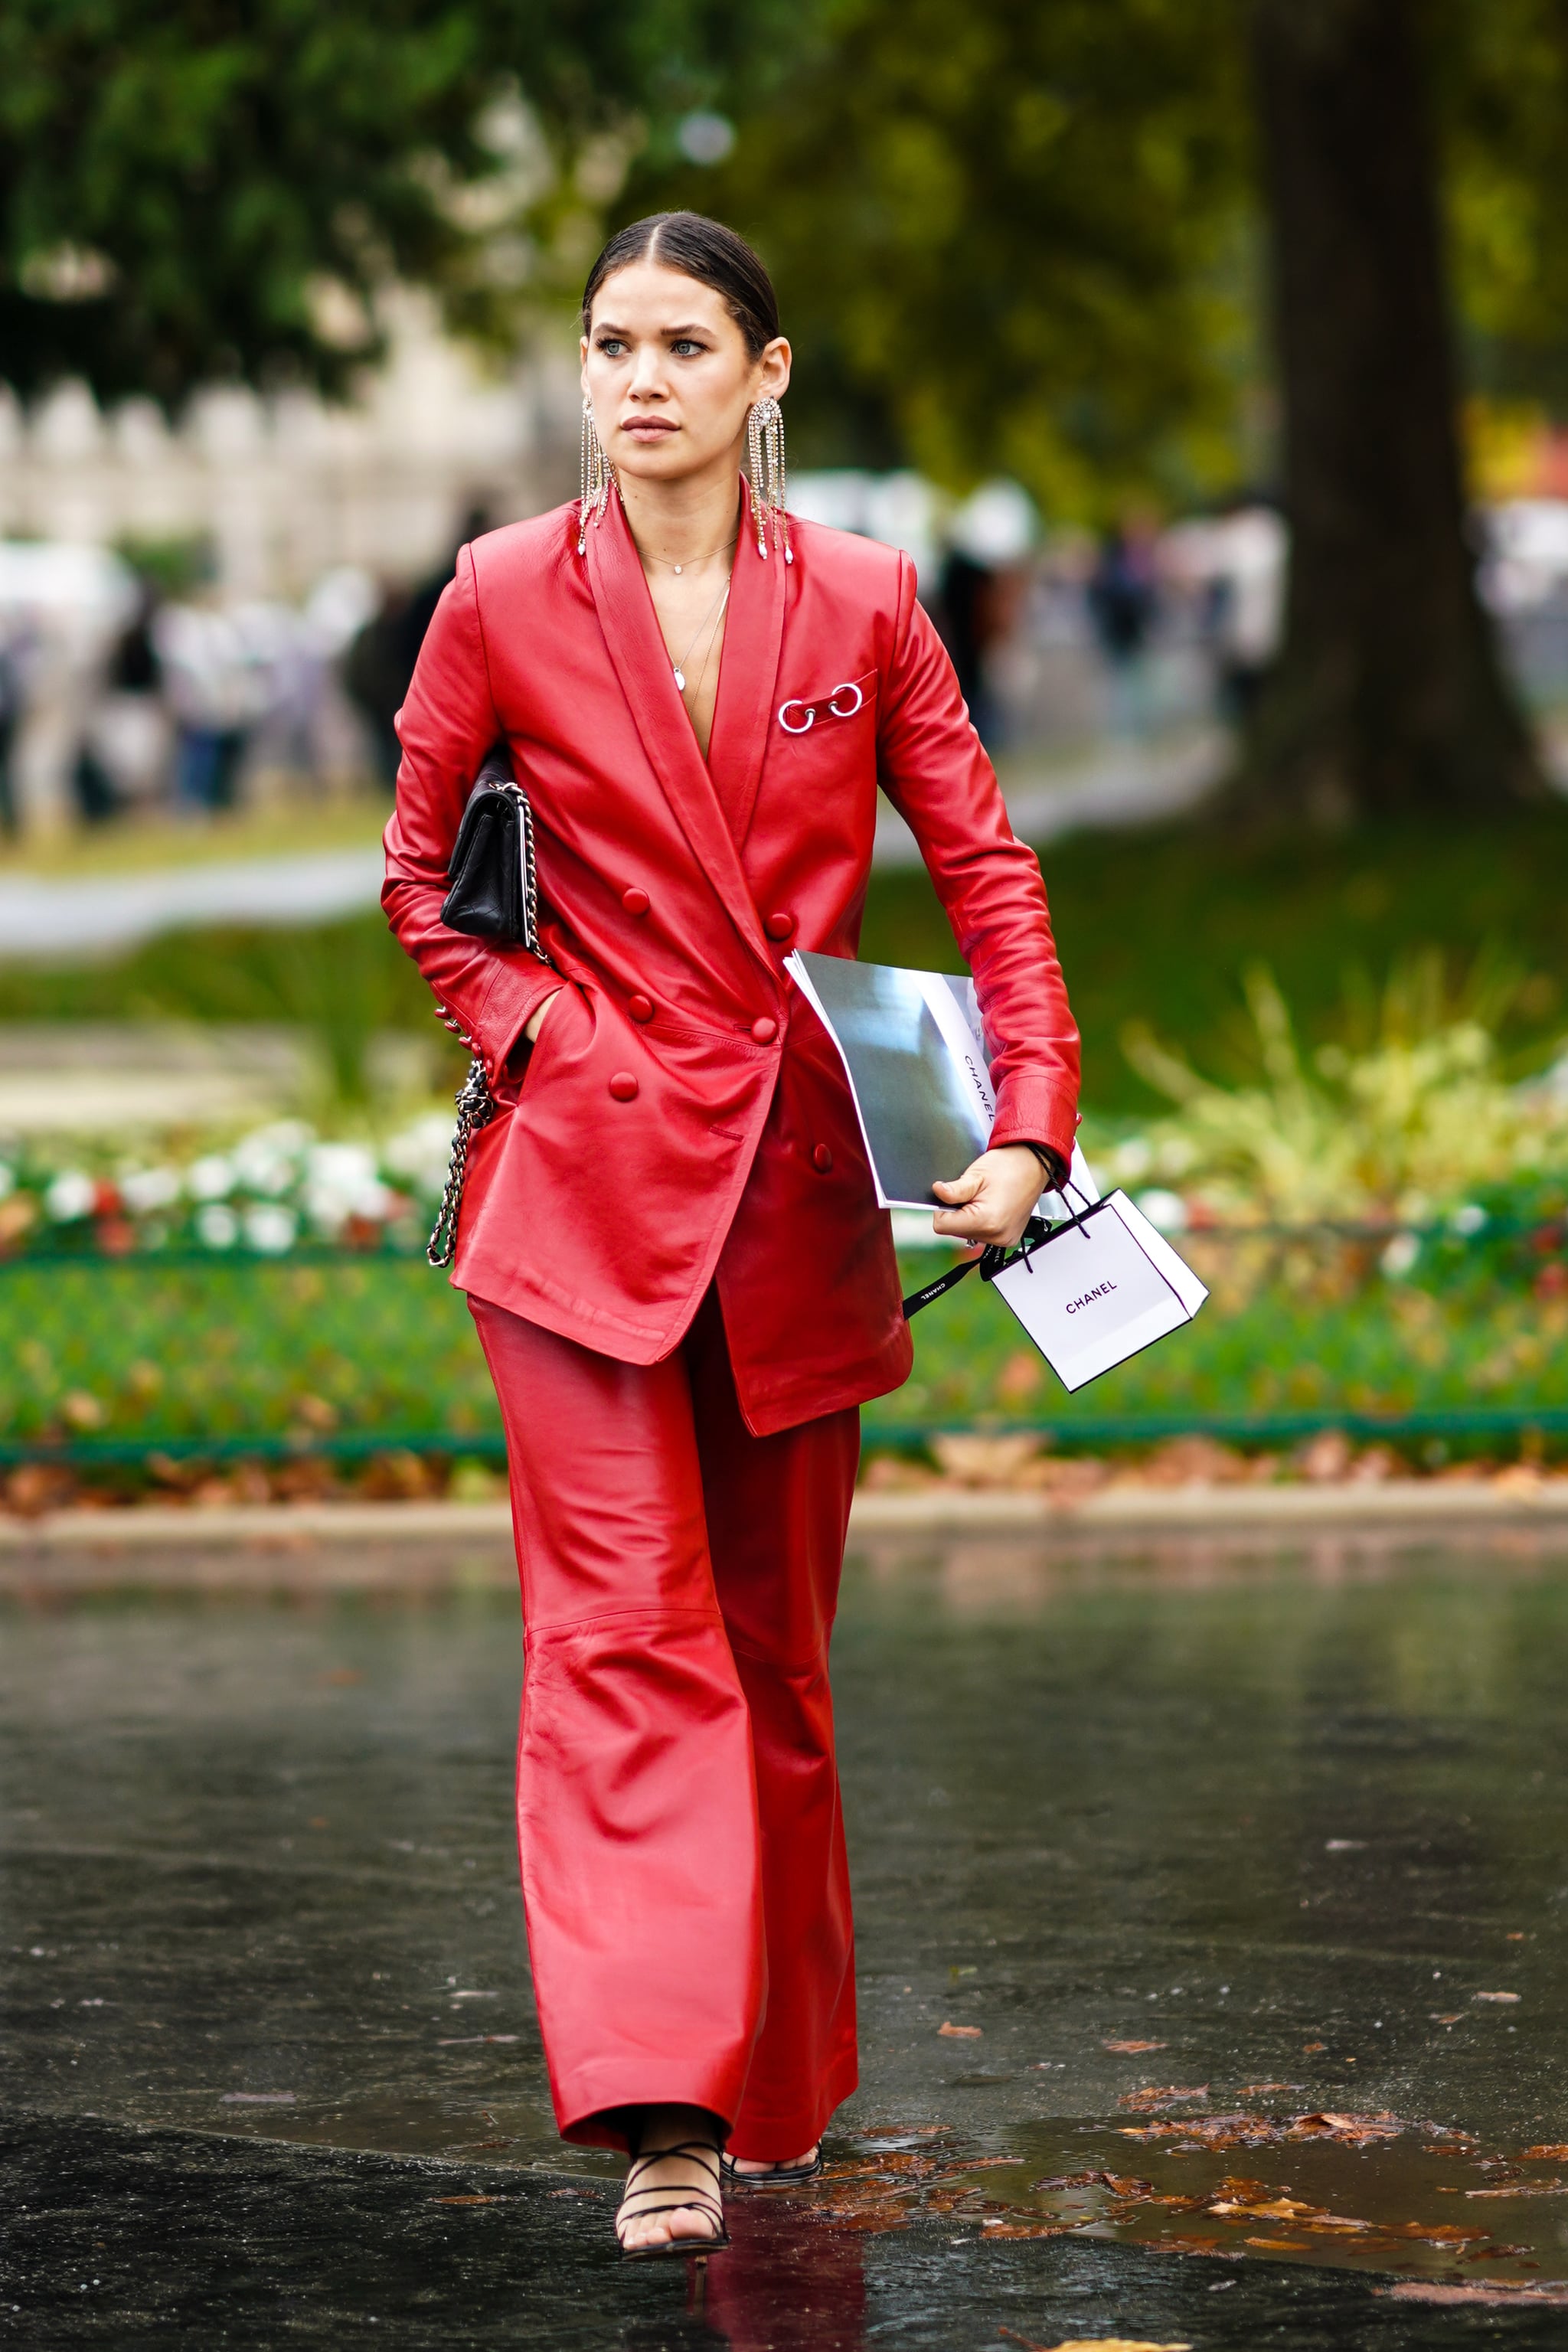 Leather Idea: Red Leather + Black Clutch | 15 Ways to Wear Leather Pants Like a Total Fashion Pro This Season | POPSUGAR Fashion Photo 13